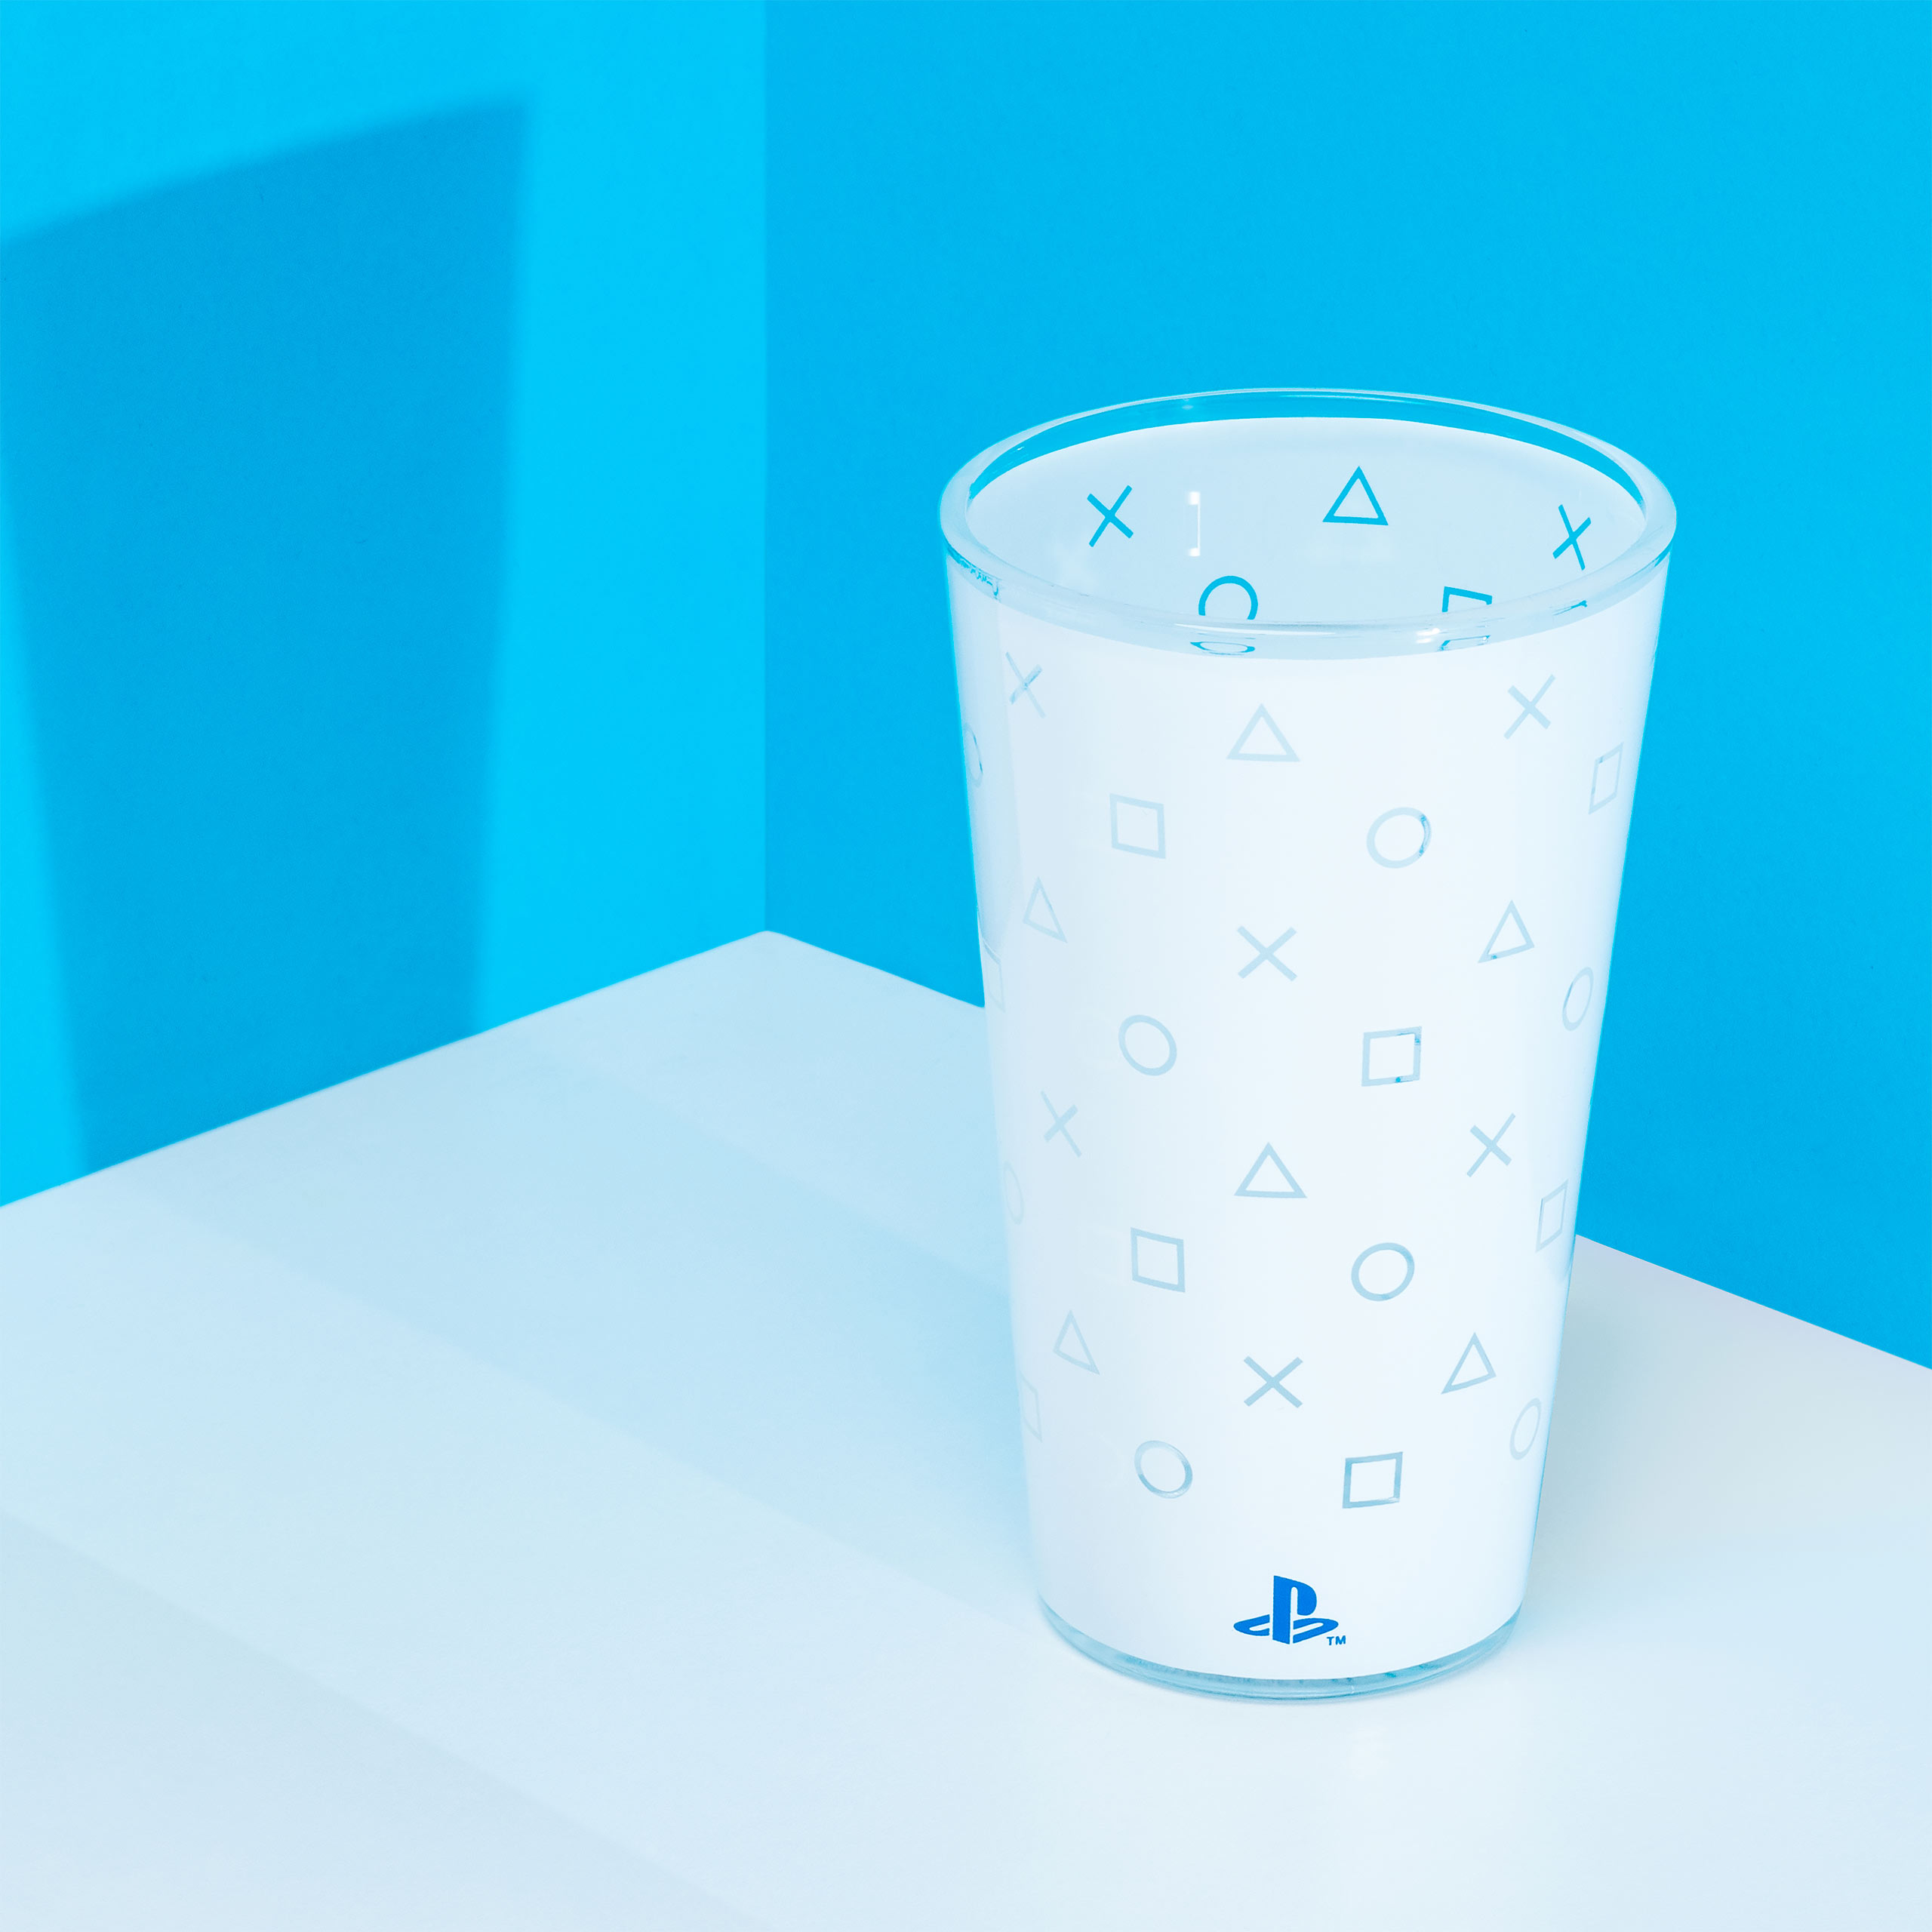 PlayStation - PS5 Knoppen Glas